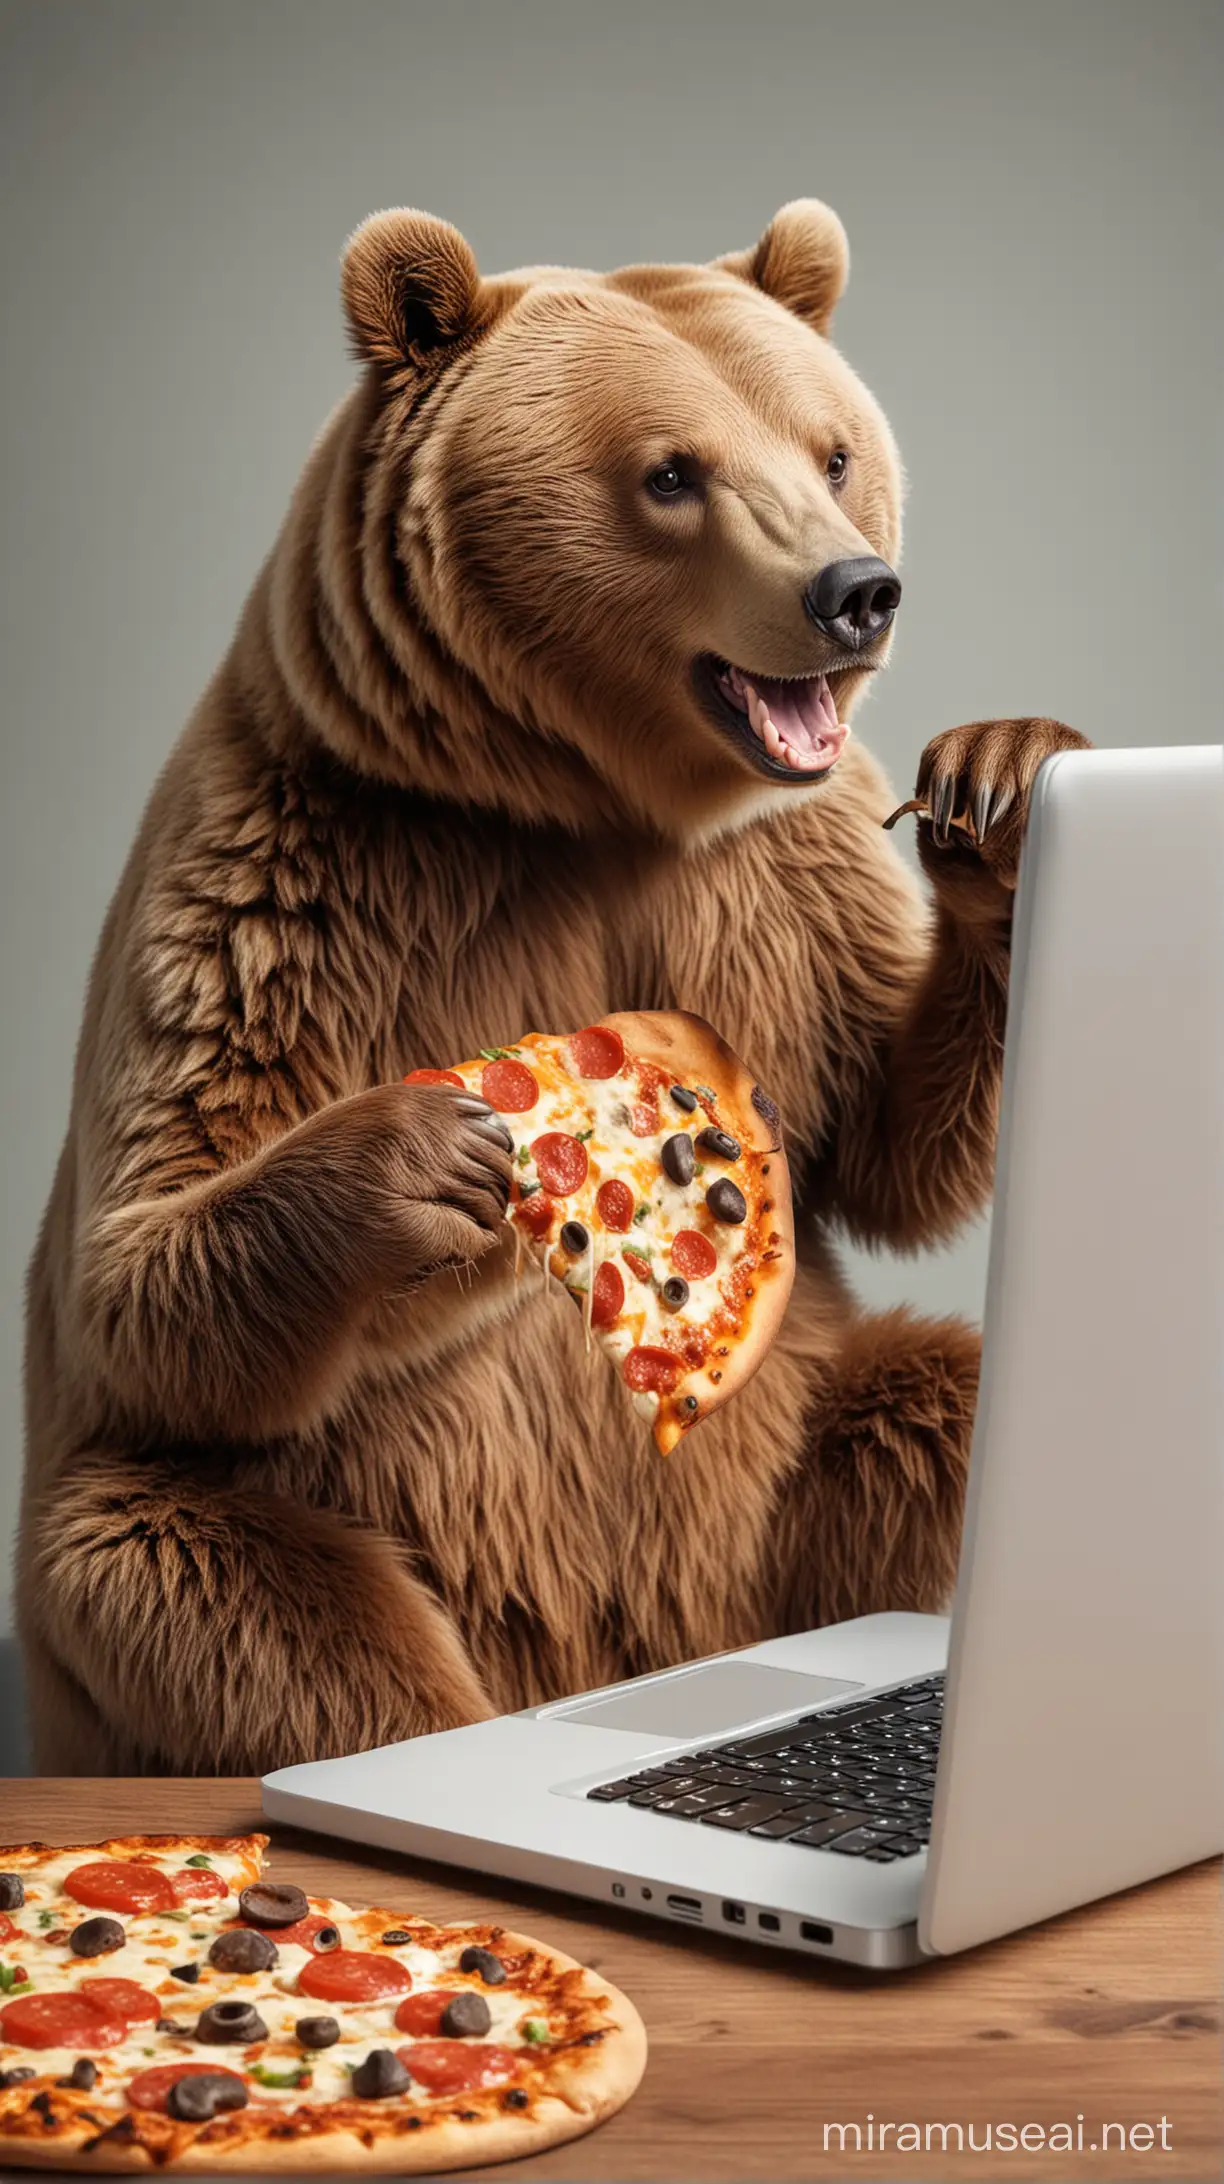 generate image that a bear is working with laptop and eating pizza